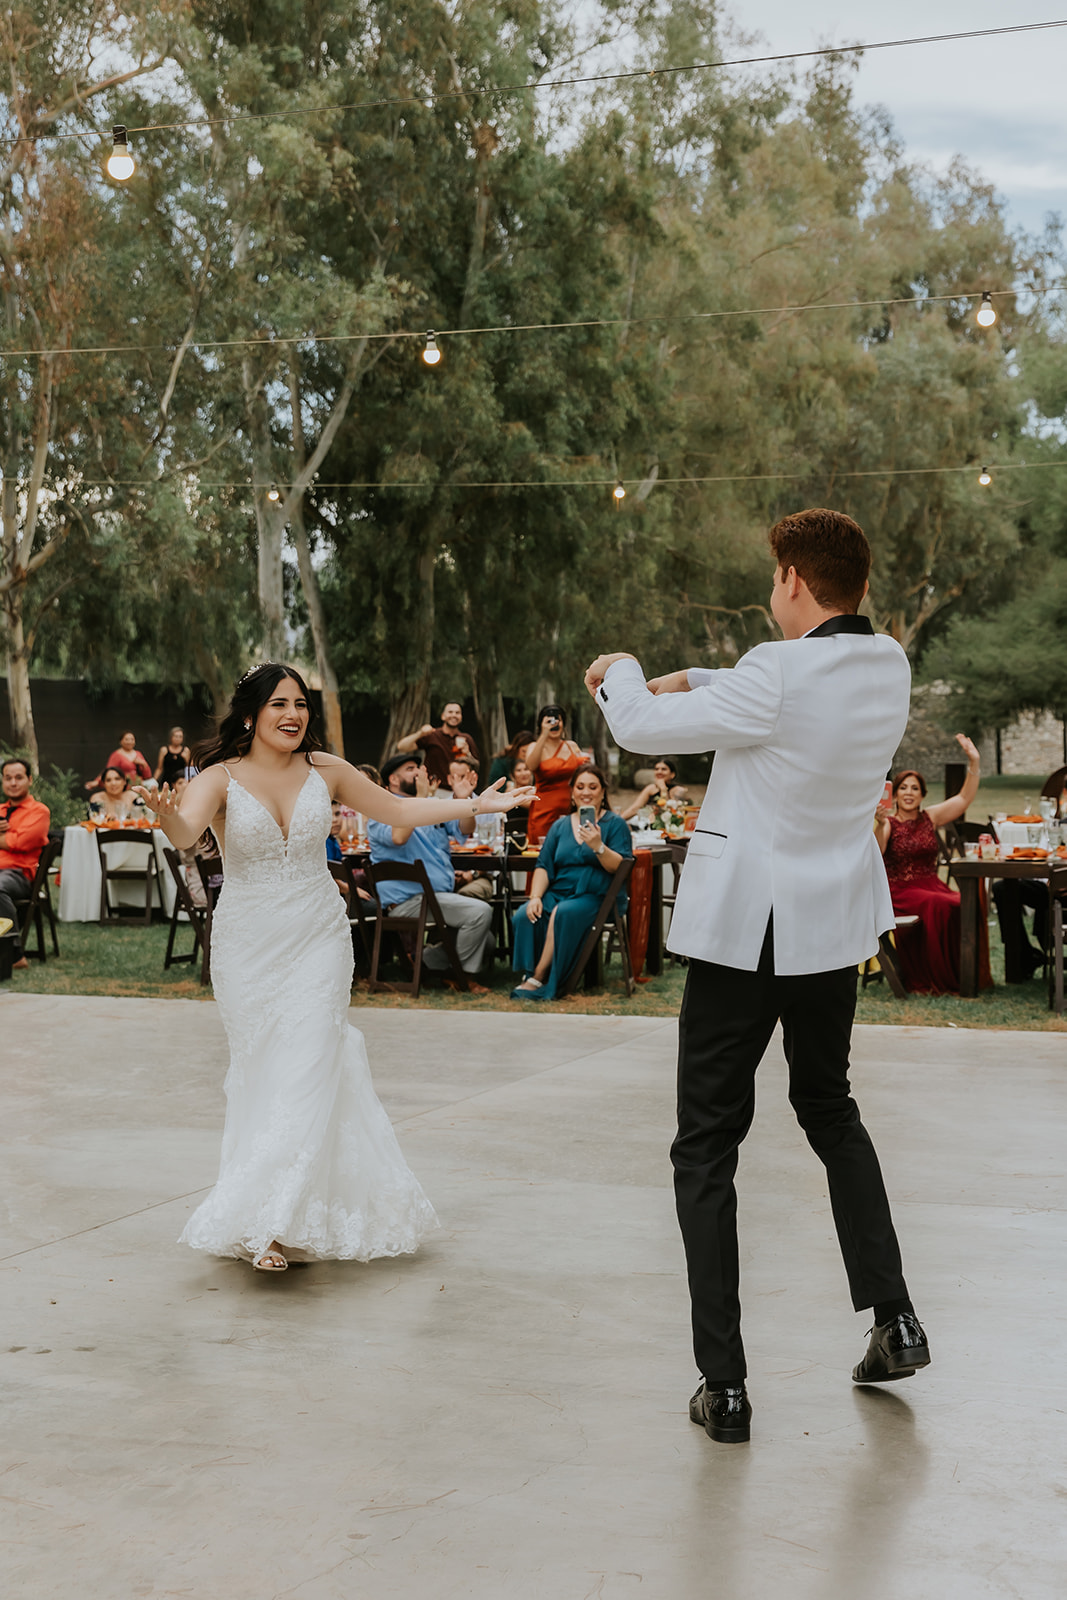 bride and groom dancing together at their themed wedding